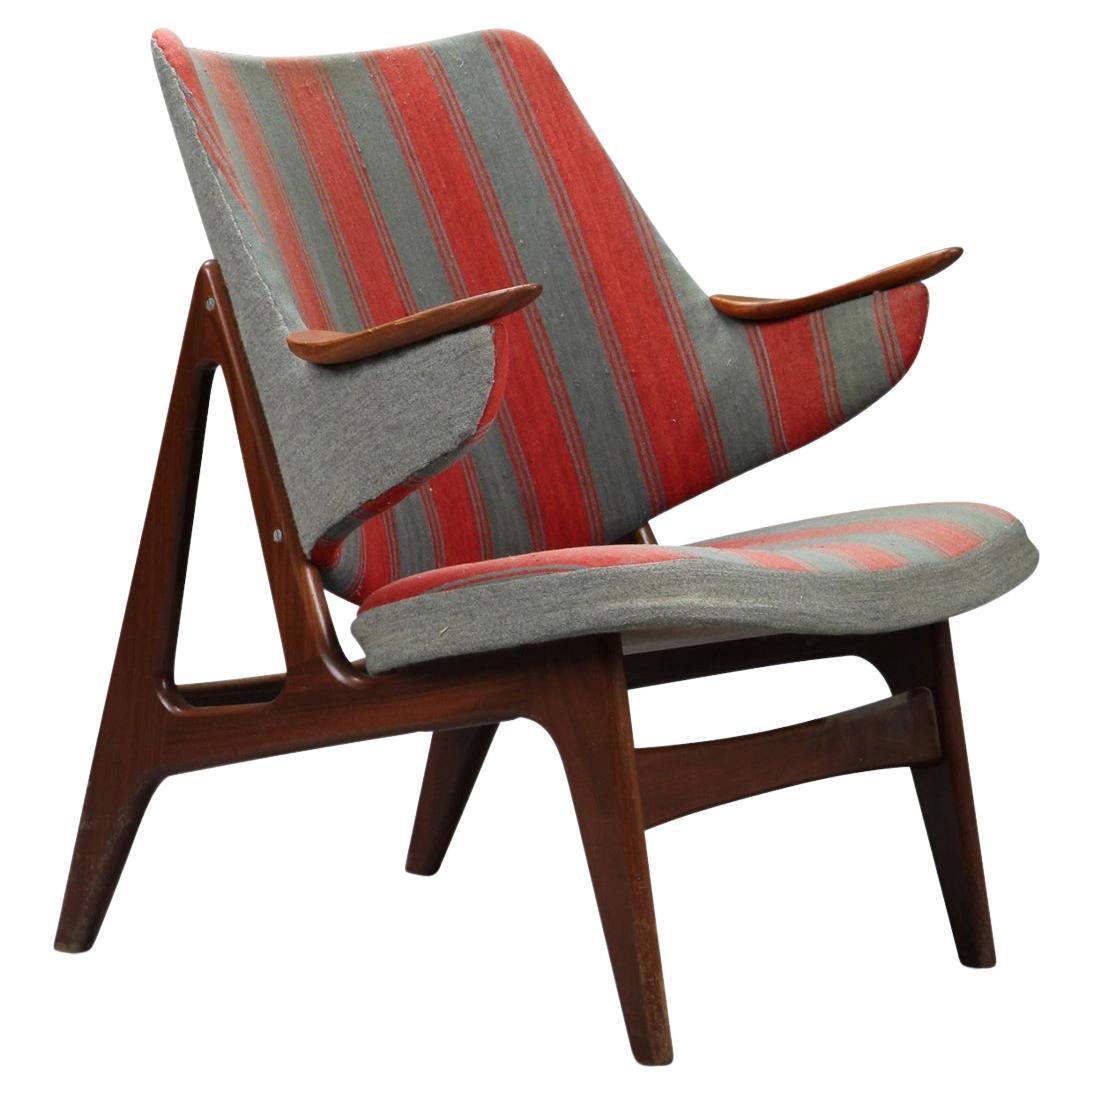 A Frame Lounge Chair in Teak by Carl Edward Matthes For Sale